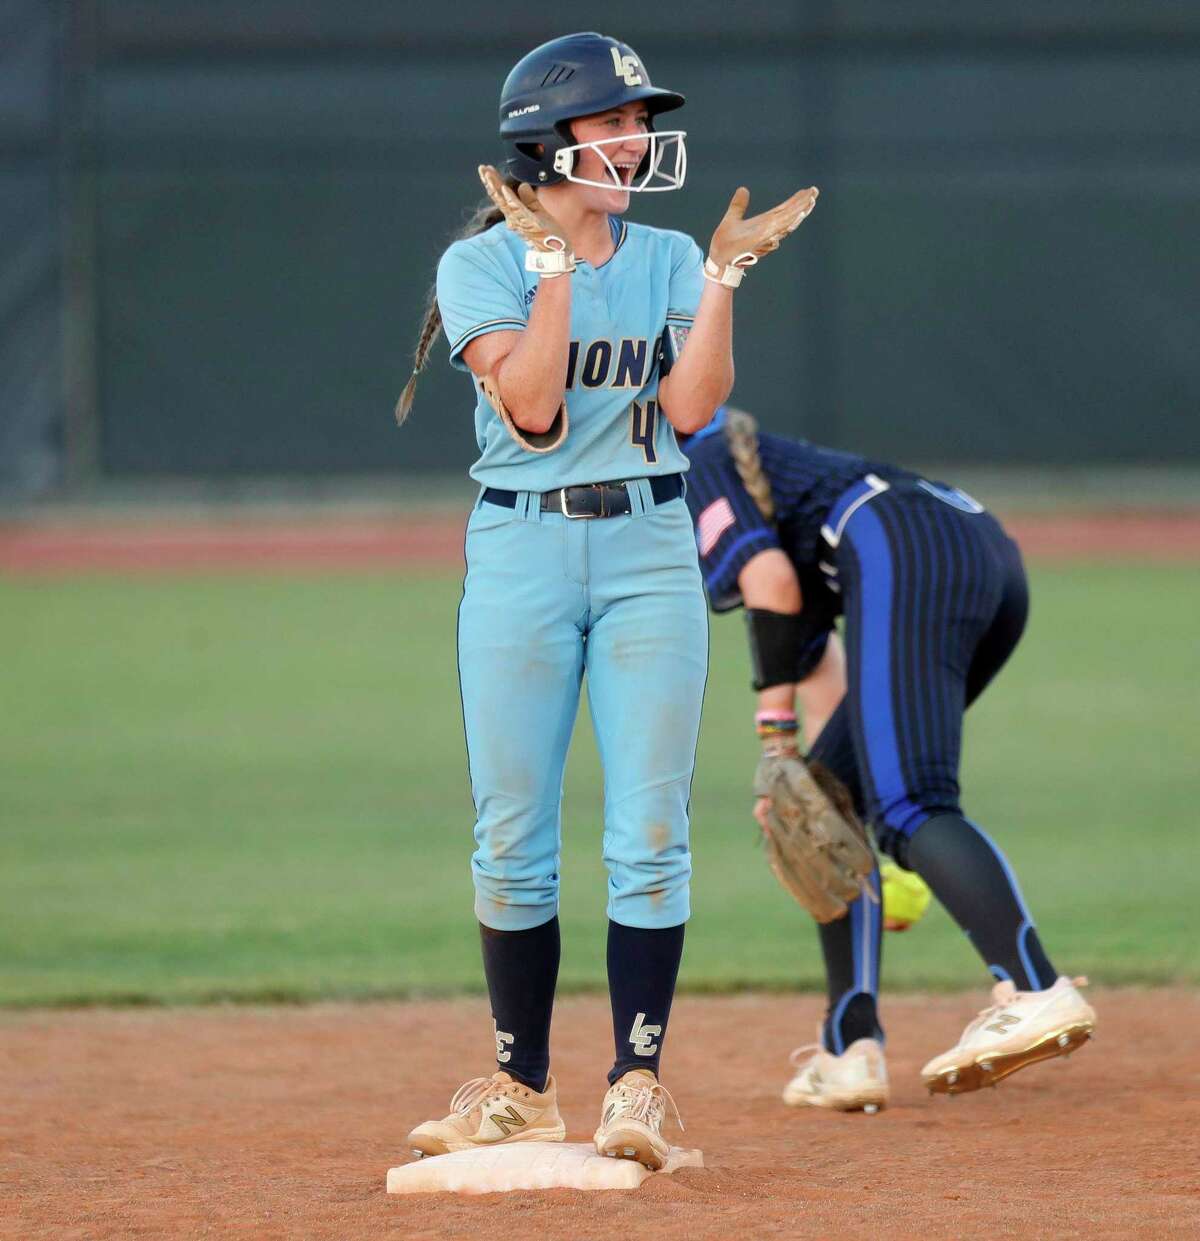 Caelee Clark #4 of Lake Creek reacts after hitting a double in the fifth inning of Game 1 of a Region III-5A semifinal high school softball series at Katy Tompkins High School, Wednesday, May 18, 2022, in Katy.